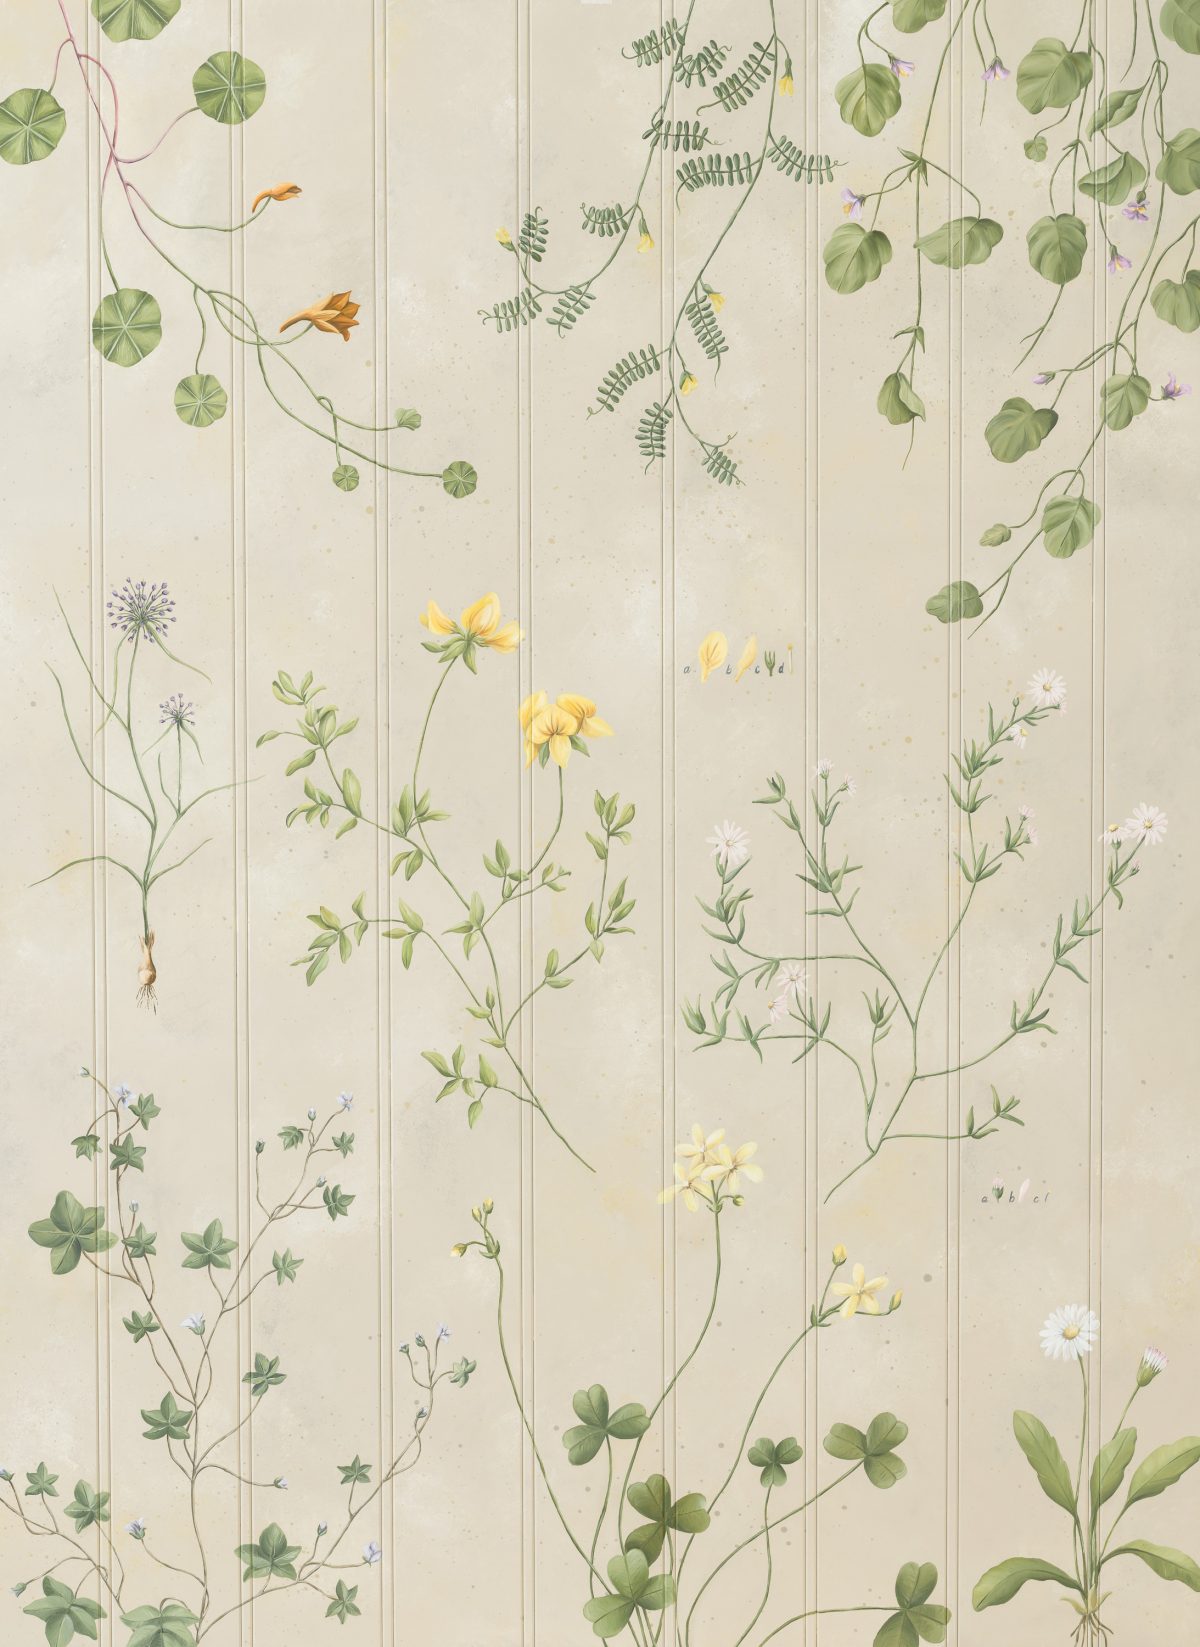 Soft suggestions of colour and the prettiest little flowers - we took inspiration from old botanical books here.